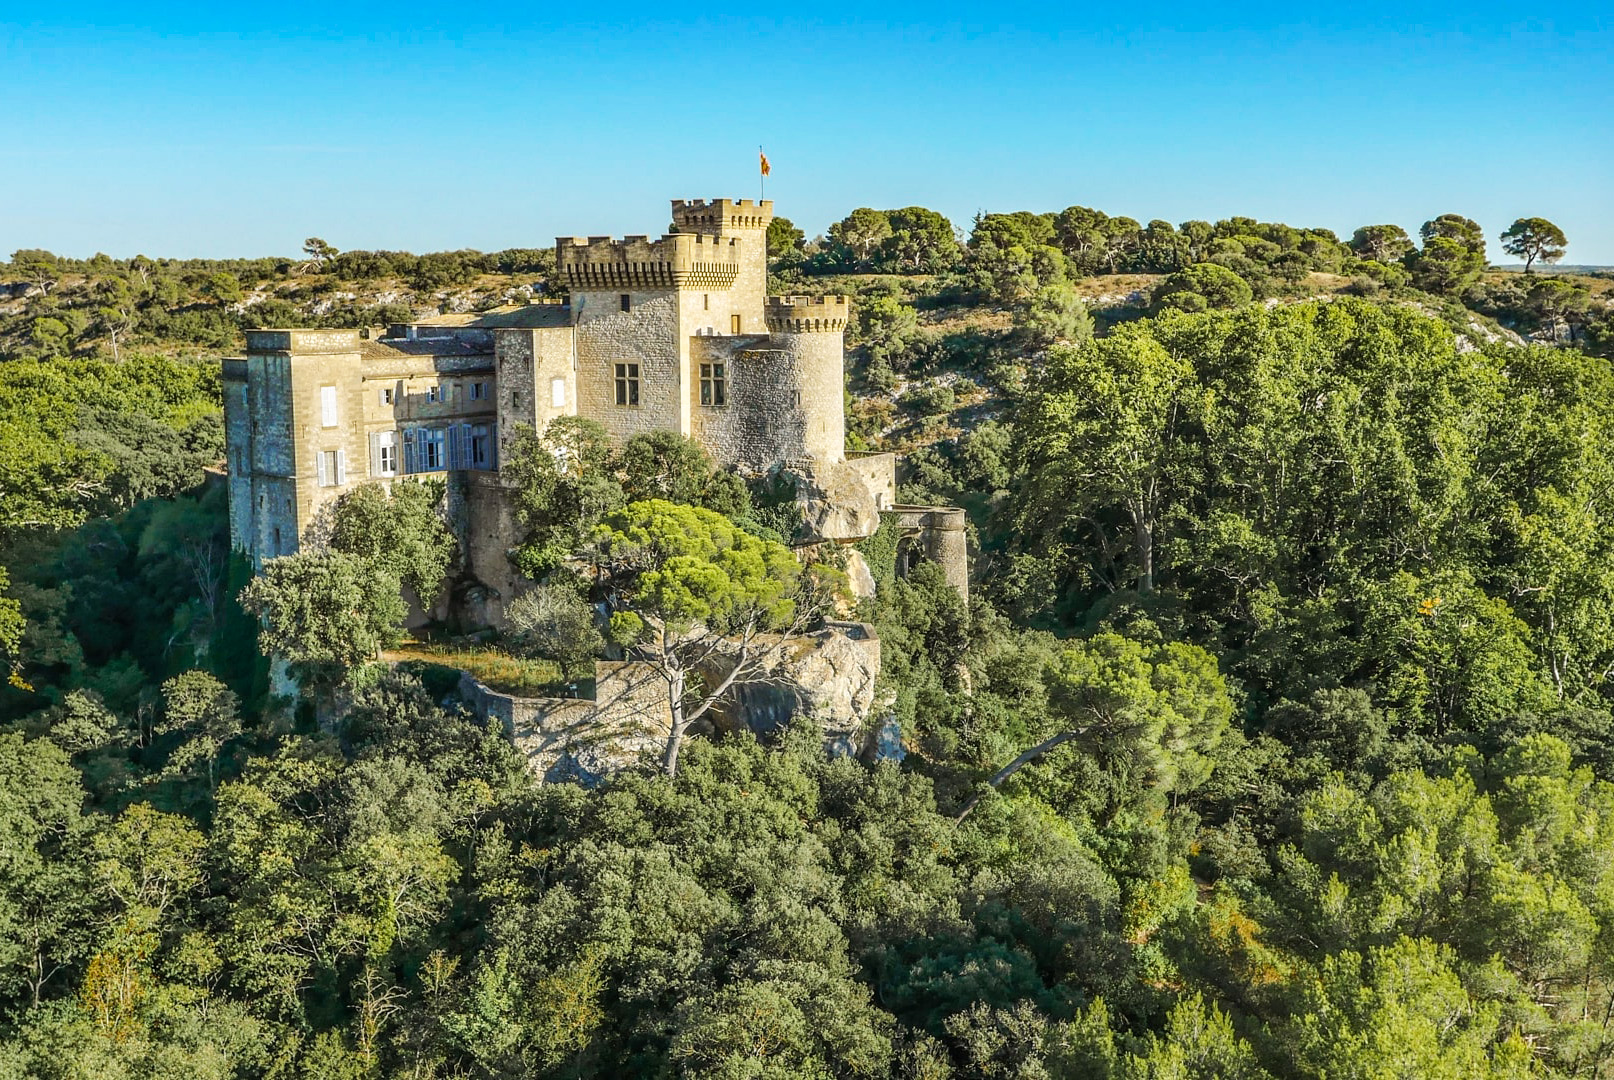 Around Aix-en-Provence - Chateau de la Barben © Georges Simone - licence [CC BY-SA 4.0] from Wikimedia Commons